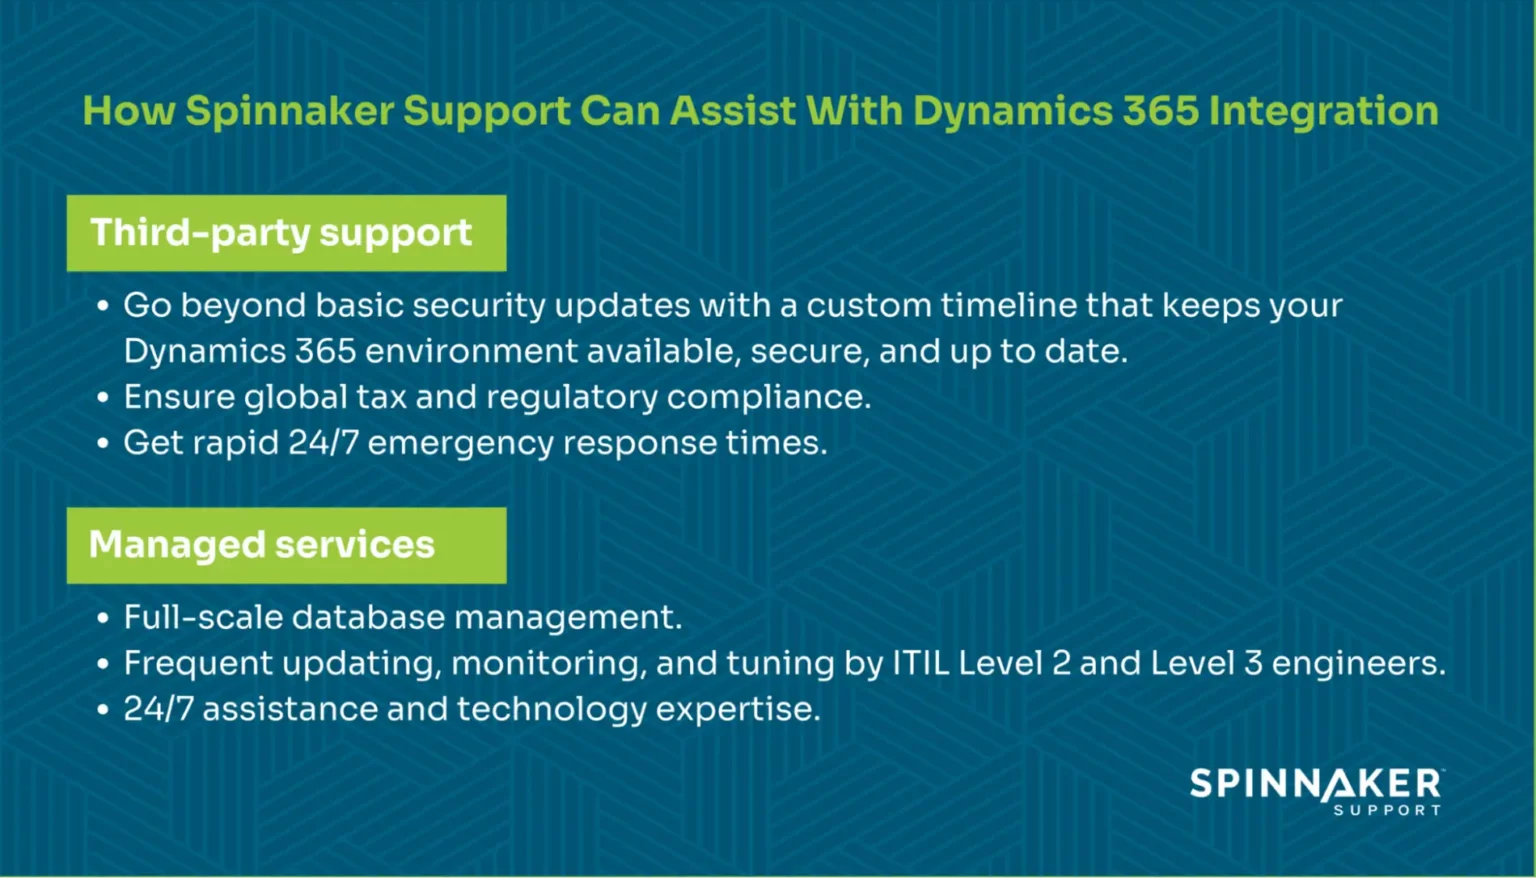 Spinnaker Support and Dynamics 365